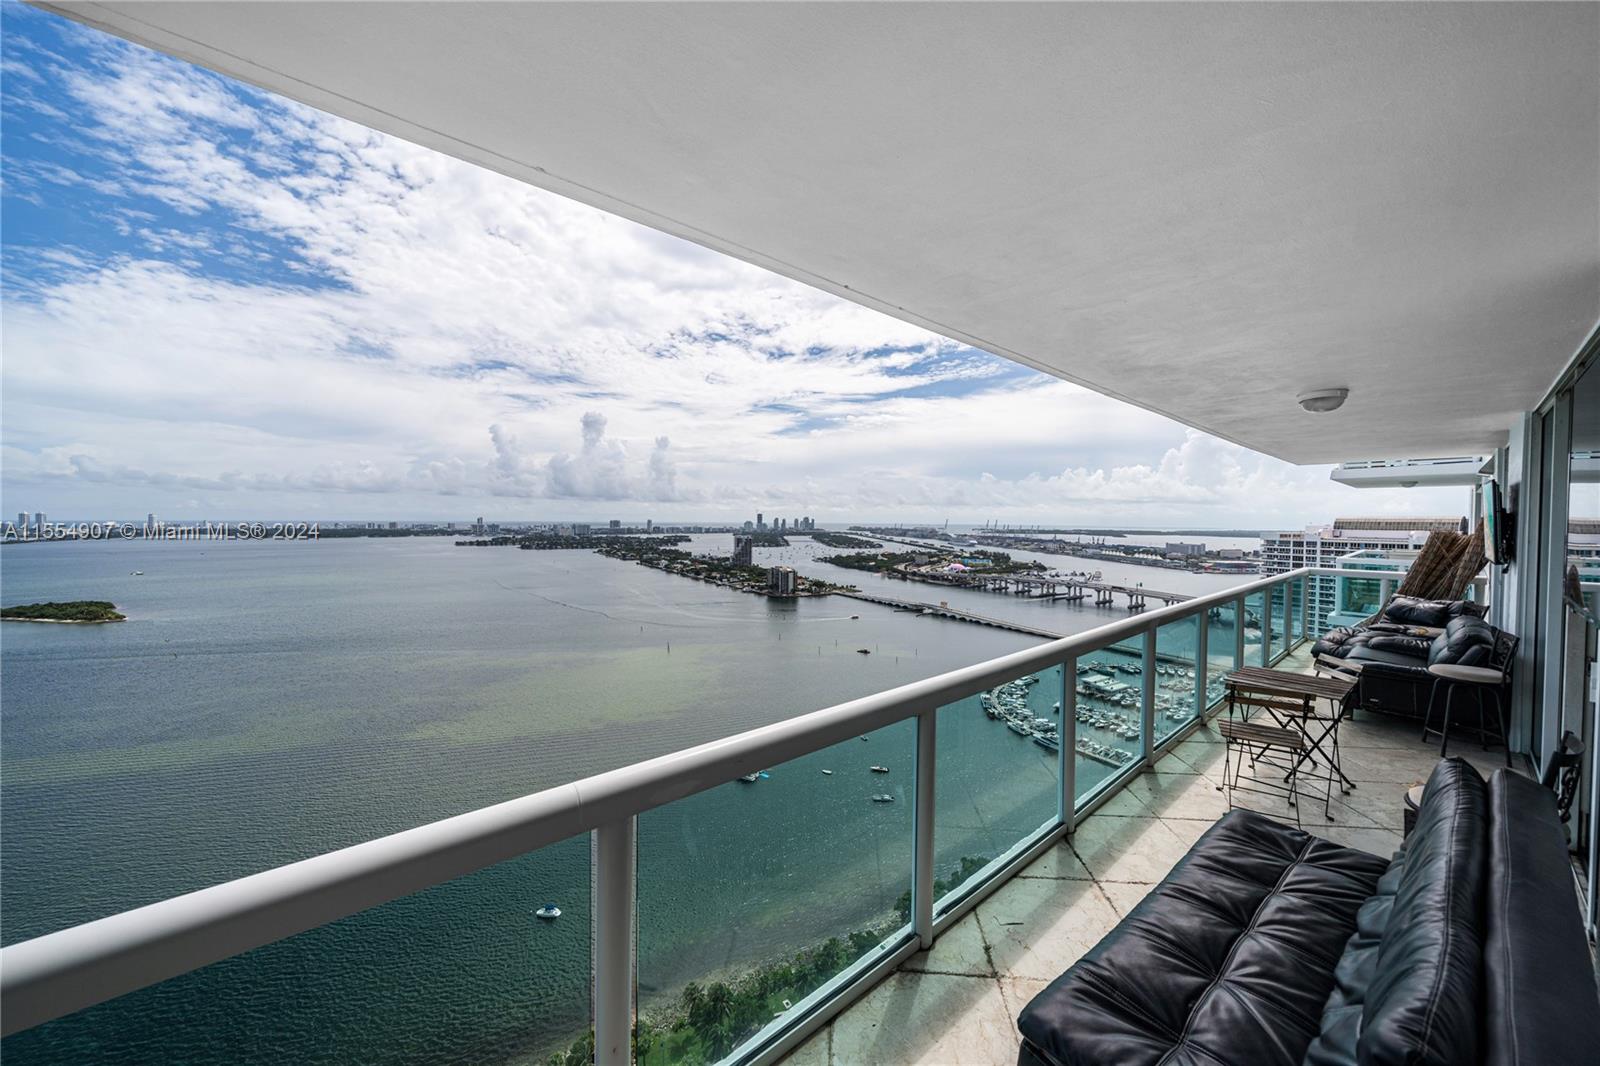 Enjoy amazing panoramic views of Biscayne Bay from this gorgeous apartment in the sky! This 2 bedroom/2 bath split plan condo has been upgraded to feature marble floors throughout the bedrooms & living areas, front loading washer/dryer, the kitchen overlooks the dining area with granite counter tops and top of the line stainless steel appliances. HUGE balcony where you can enjoy the serene views of the bay. Beautiful pet friendly park in front of the building features a dog area, work out stations, tennis, volleyball & much more. Amenities at 1800 Club include a 2-story lobby, 24-hour valet parking, on-site waterfront restaurant, heated swimming pool, Zen garden, 2-story recreational floor with deck, gym, yoga/aerobics studio, sauna, steam room, massage rooms, party room & billiards room.